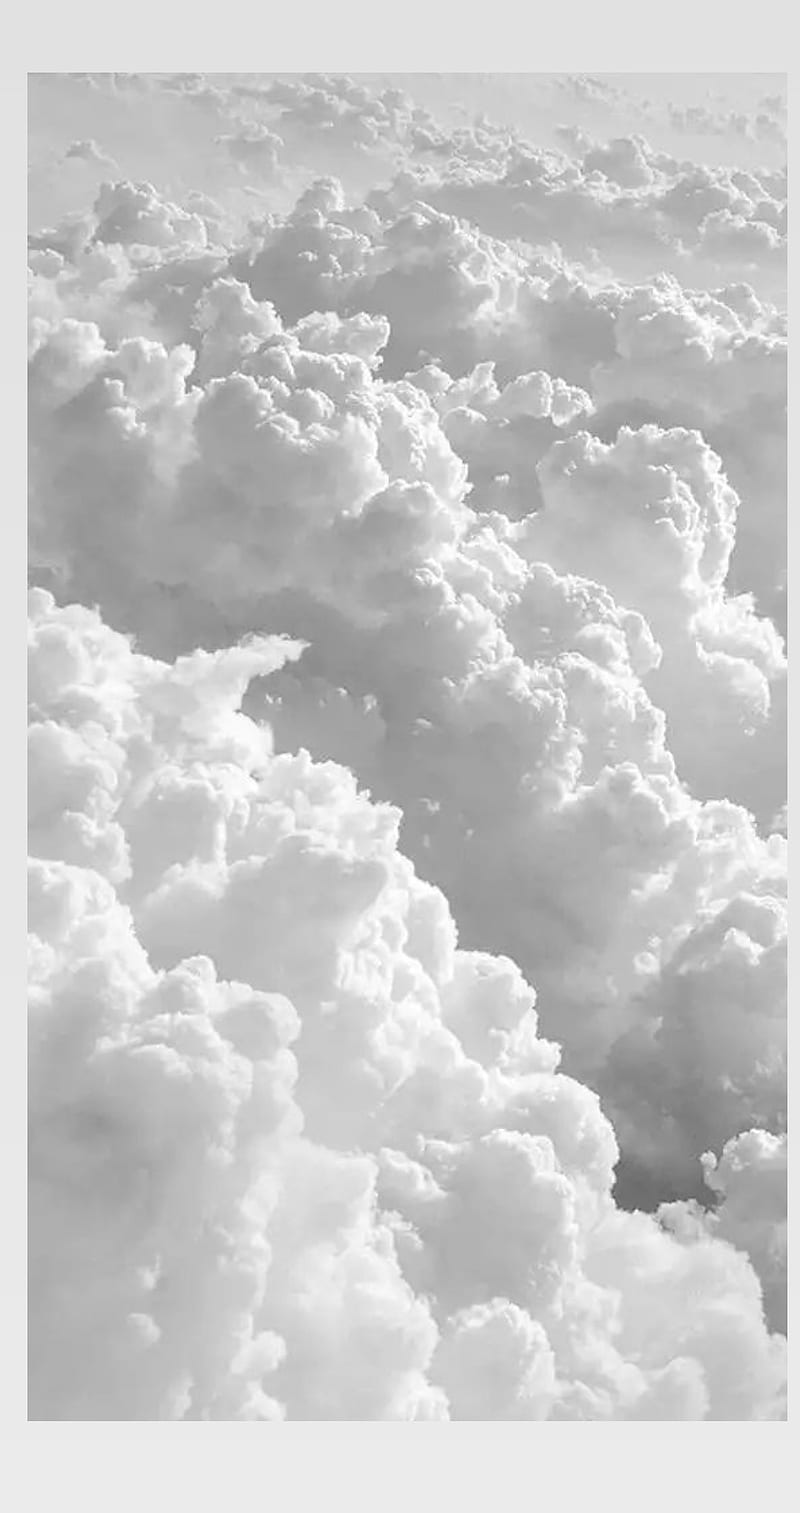 Clouds Iphone Wallpaper  Free Aesthetic HD  4K Mobile Phone Images   rawpixel